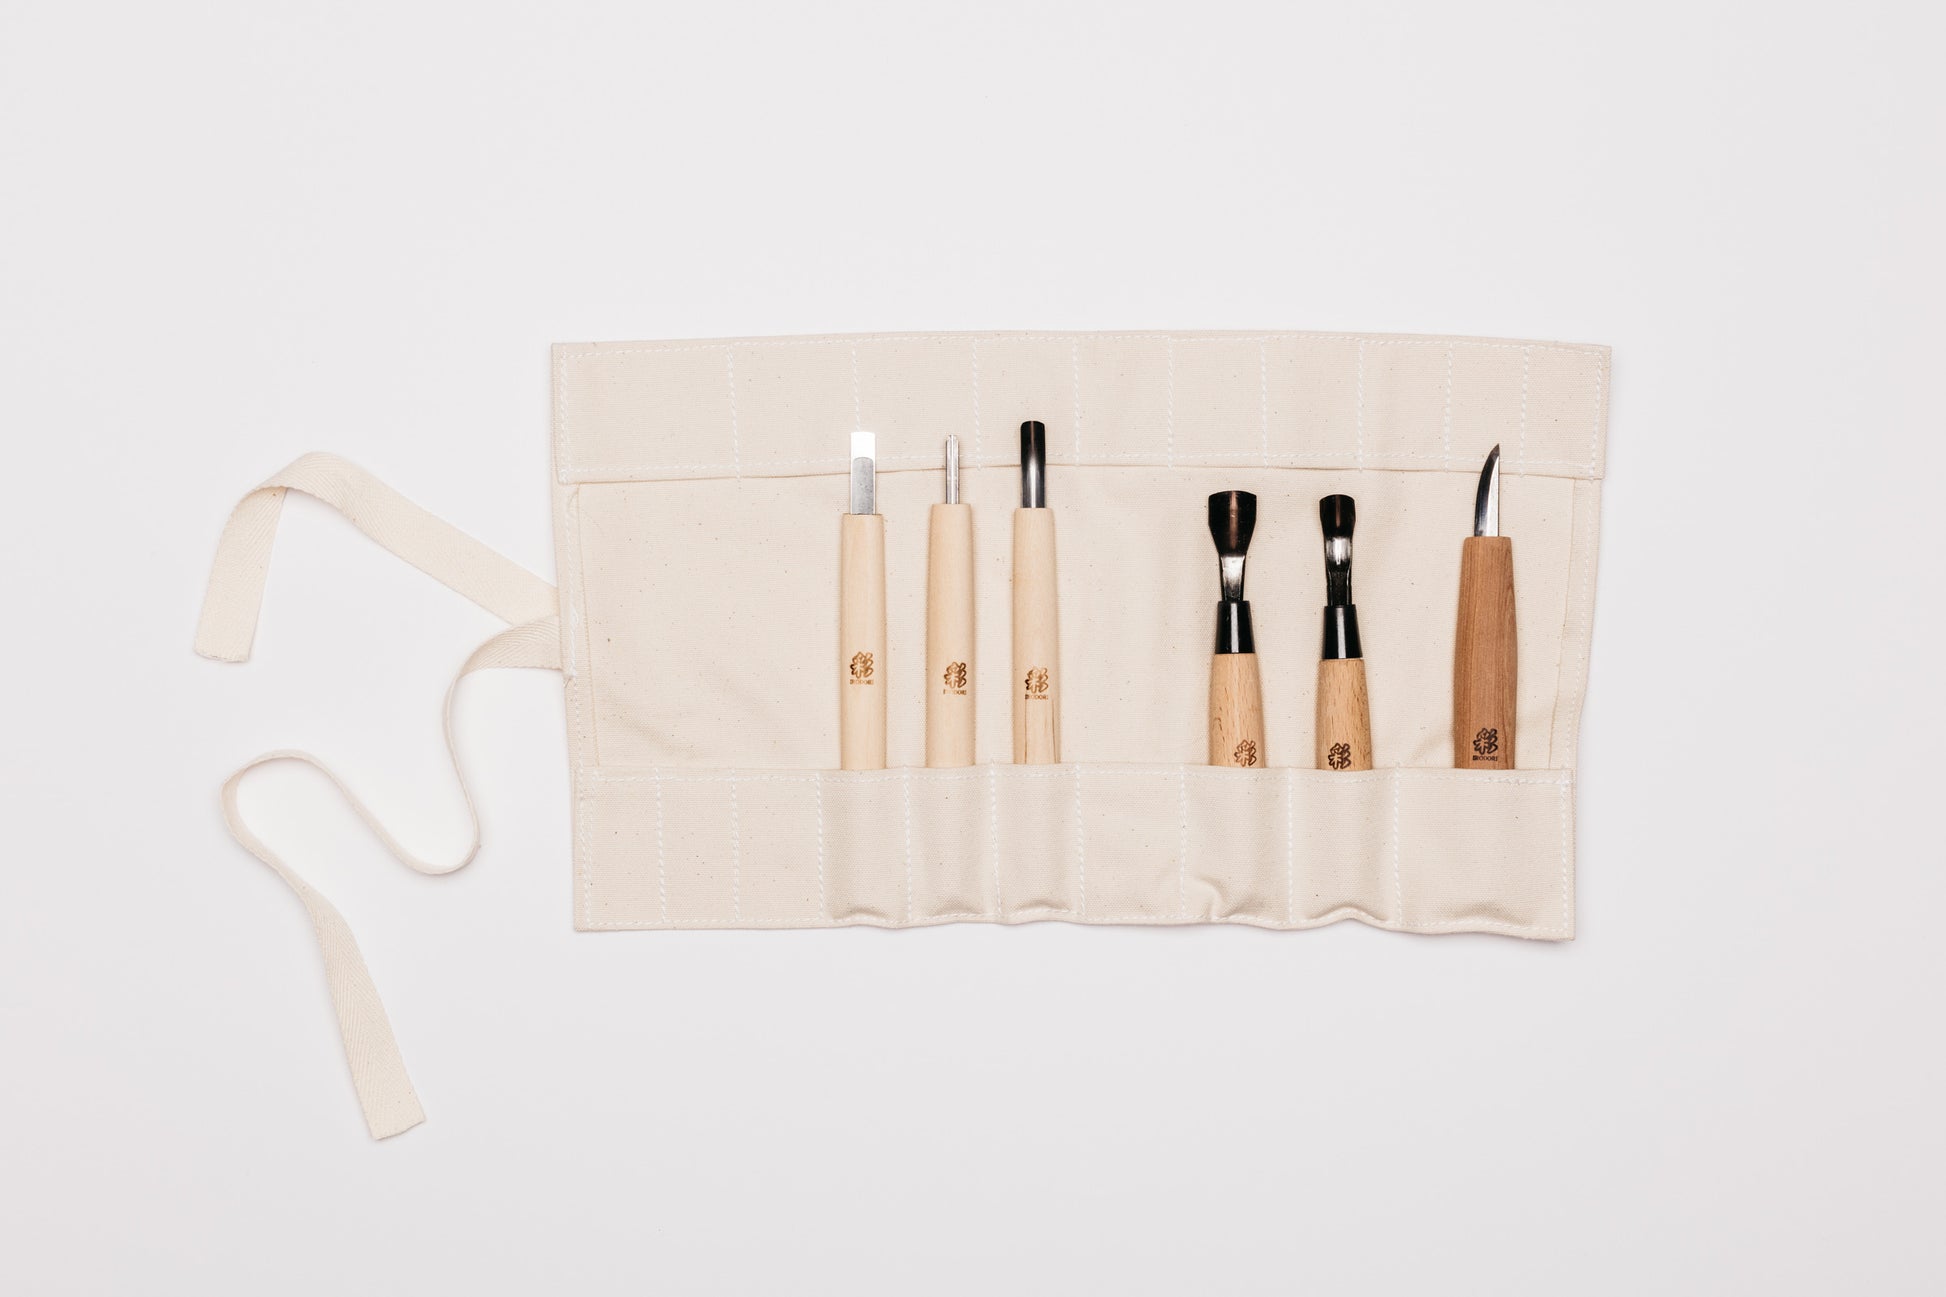 Beige tool roll laid out with all six carving tools in their individual pockets.